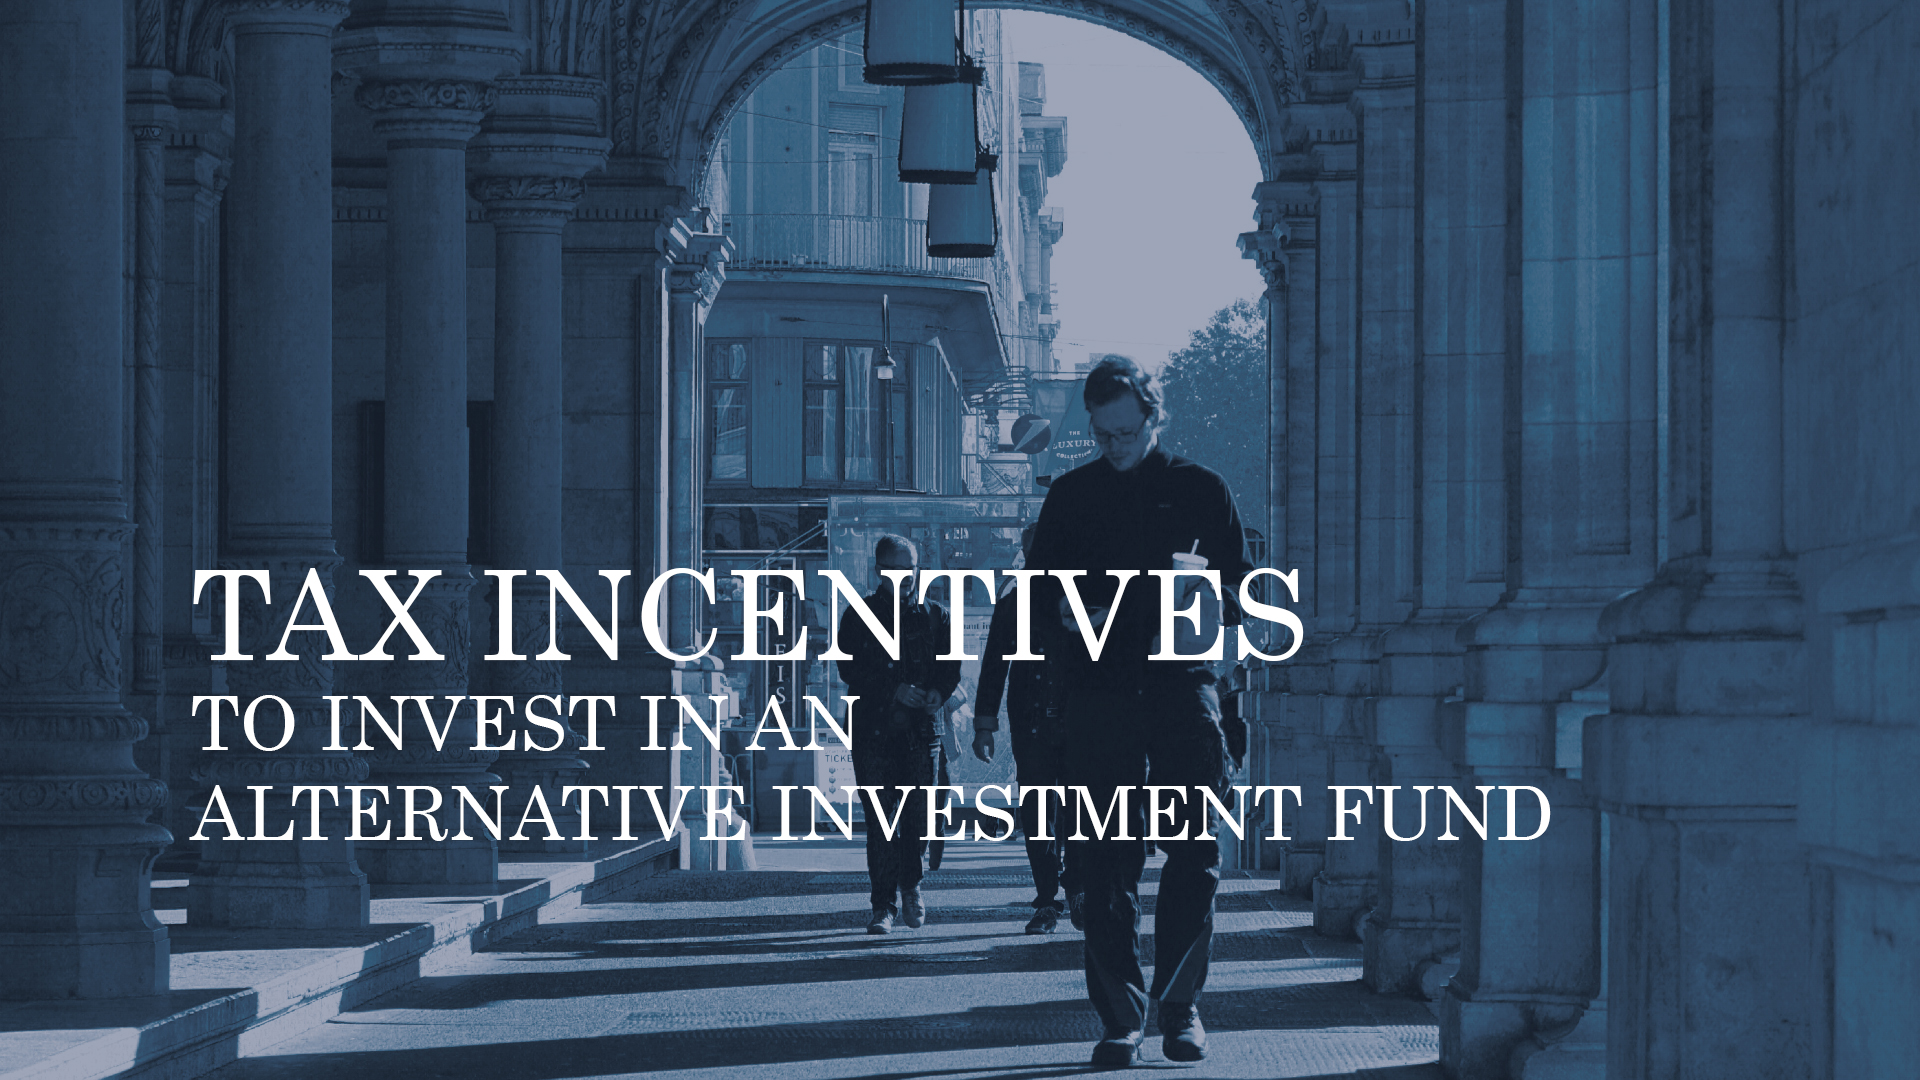 TAX INCENTIVES TO INVEST IN AN ALTERNATIVE INVESTMENT FUND (AIF)